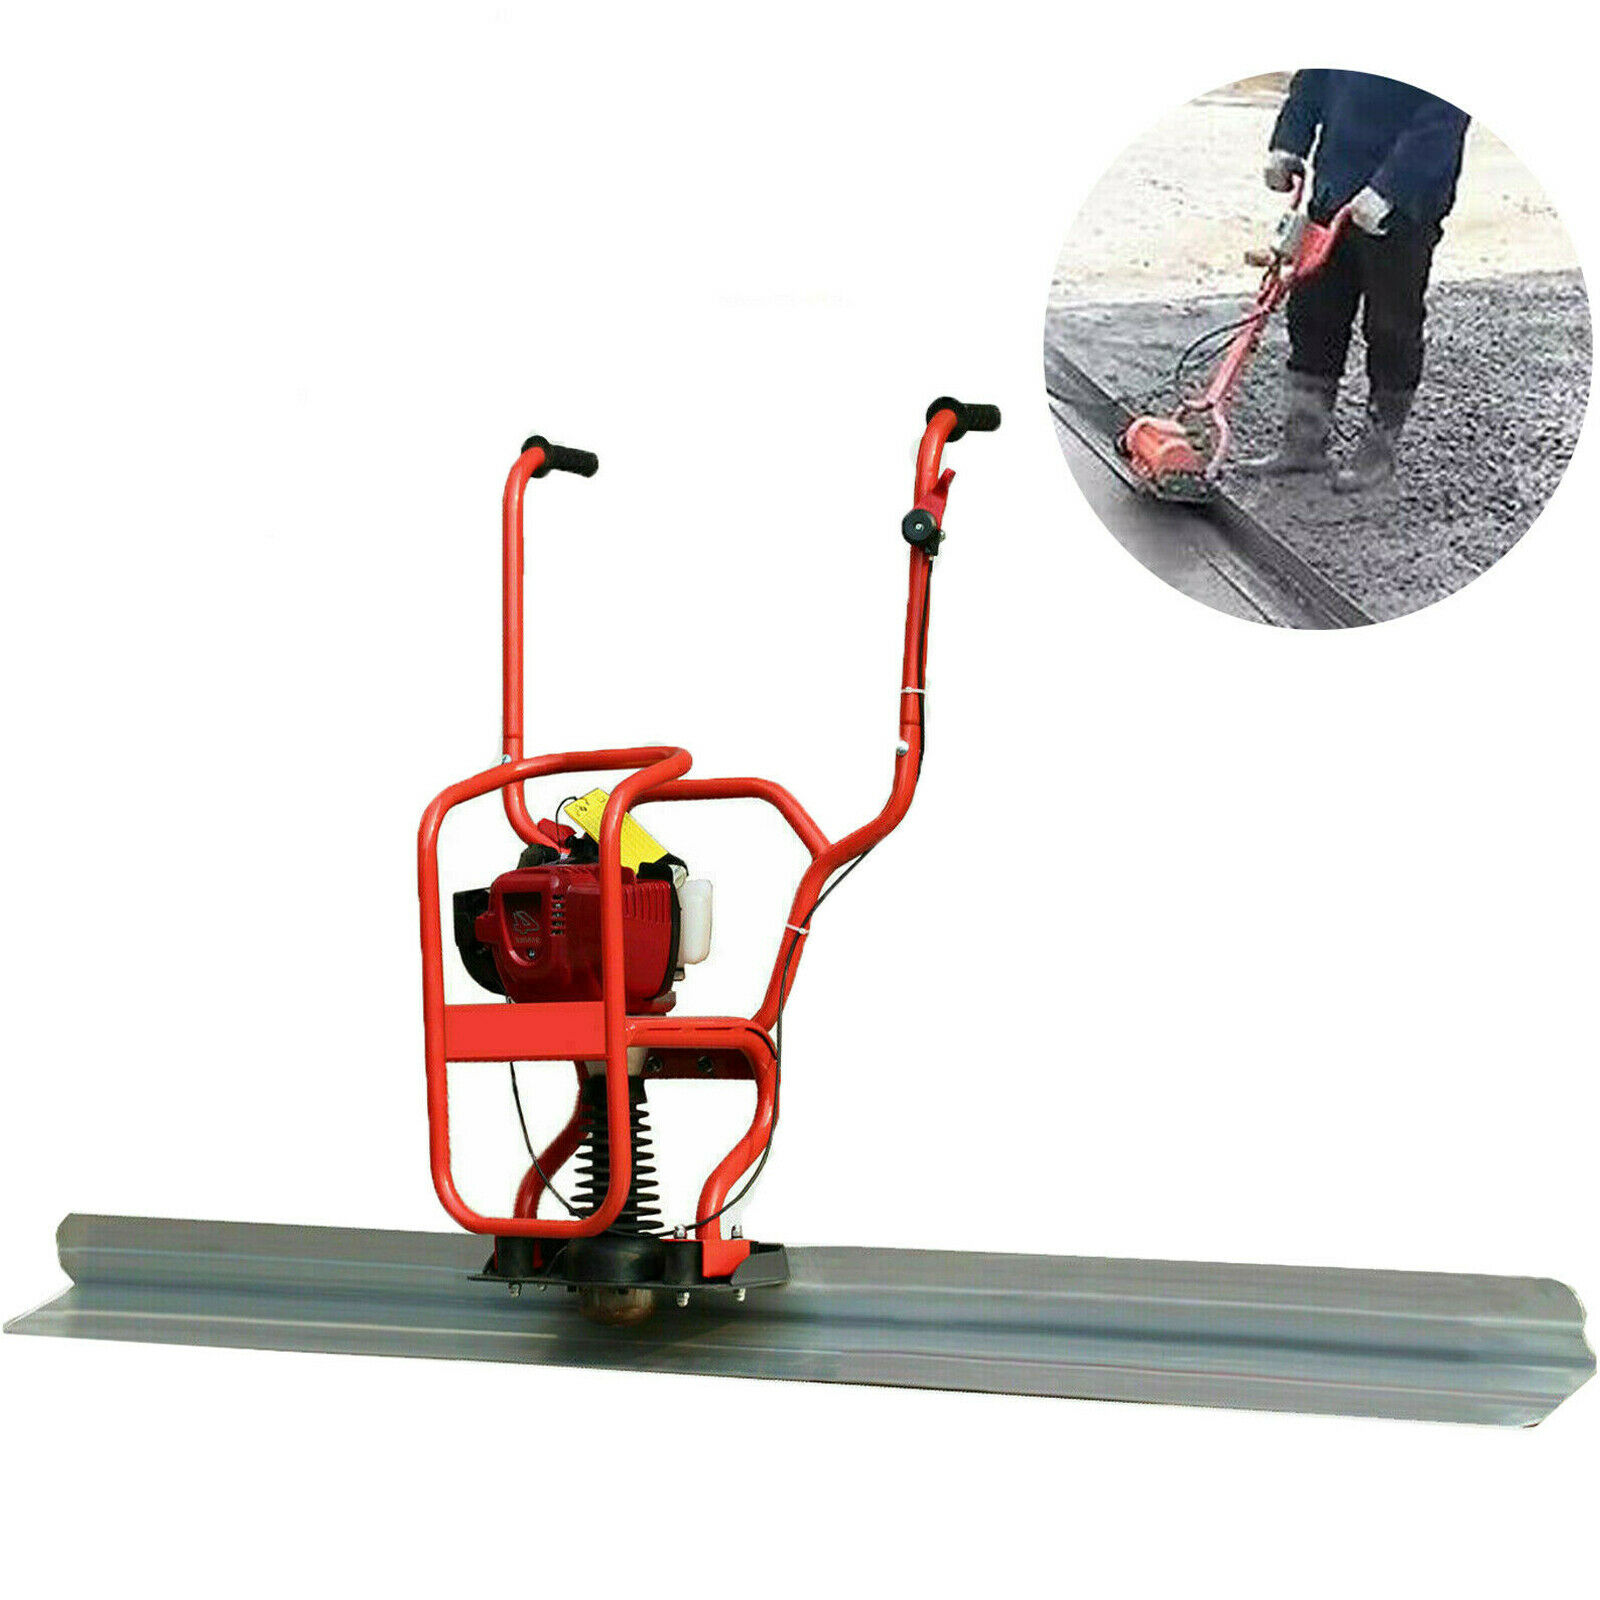 4 Stroke Gas Concrete Wet Screed Power Screed Cement 37.7cc + 6.56ft Board Us